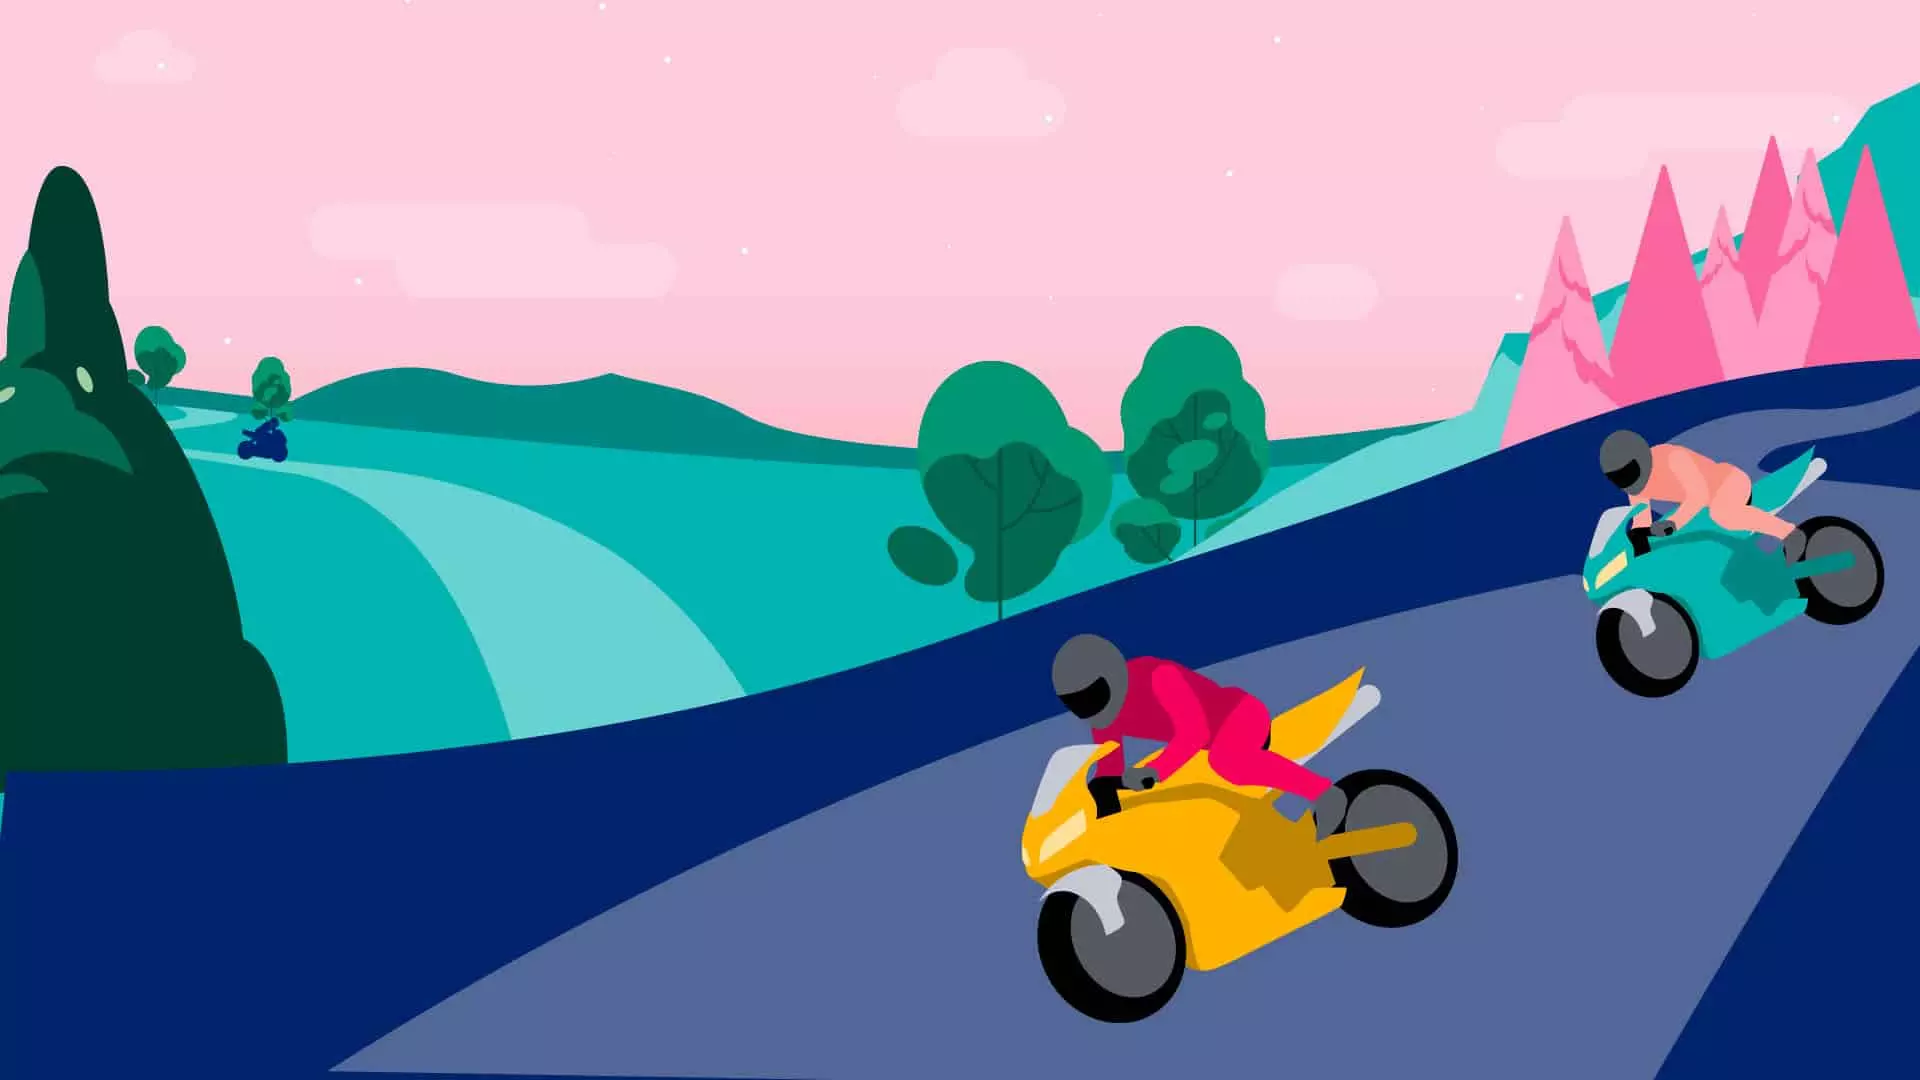 Two motorcycles riding downhill through hills